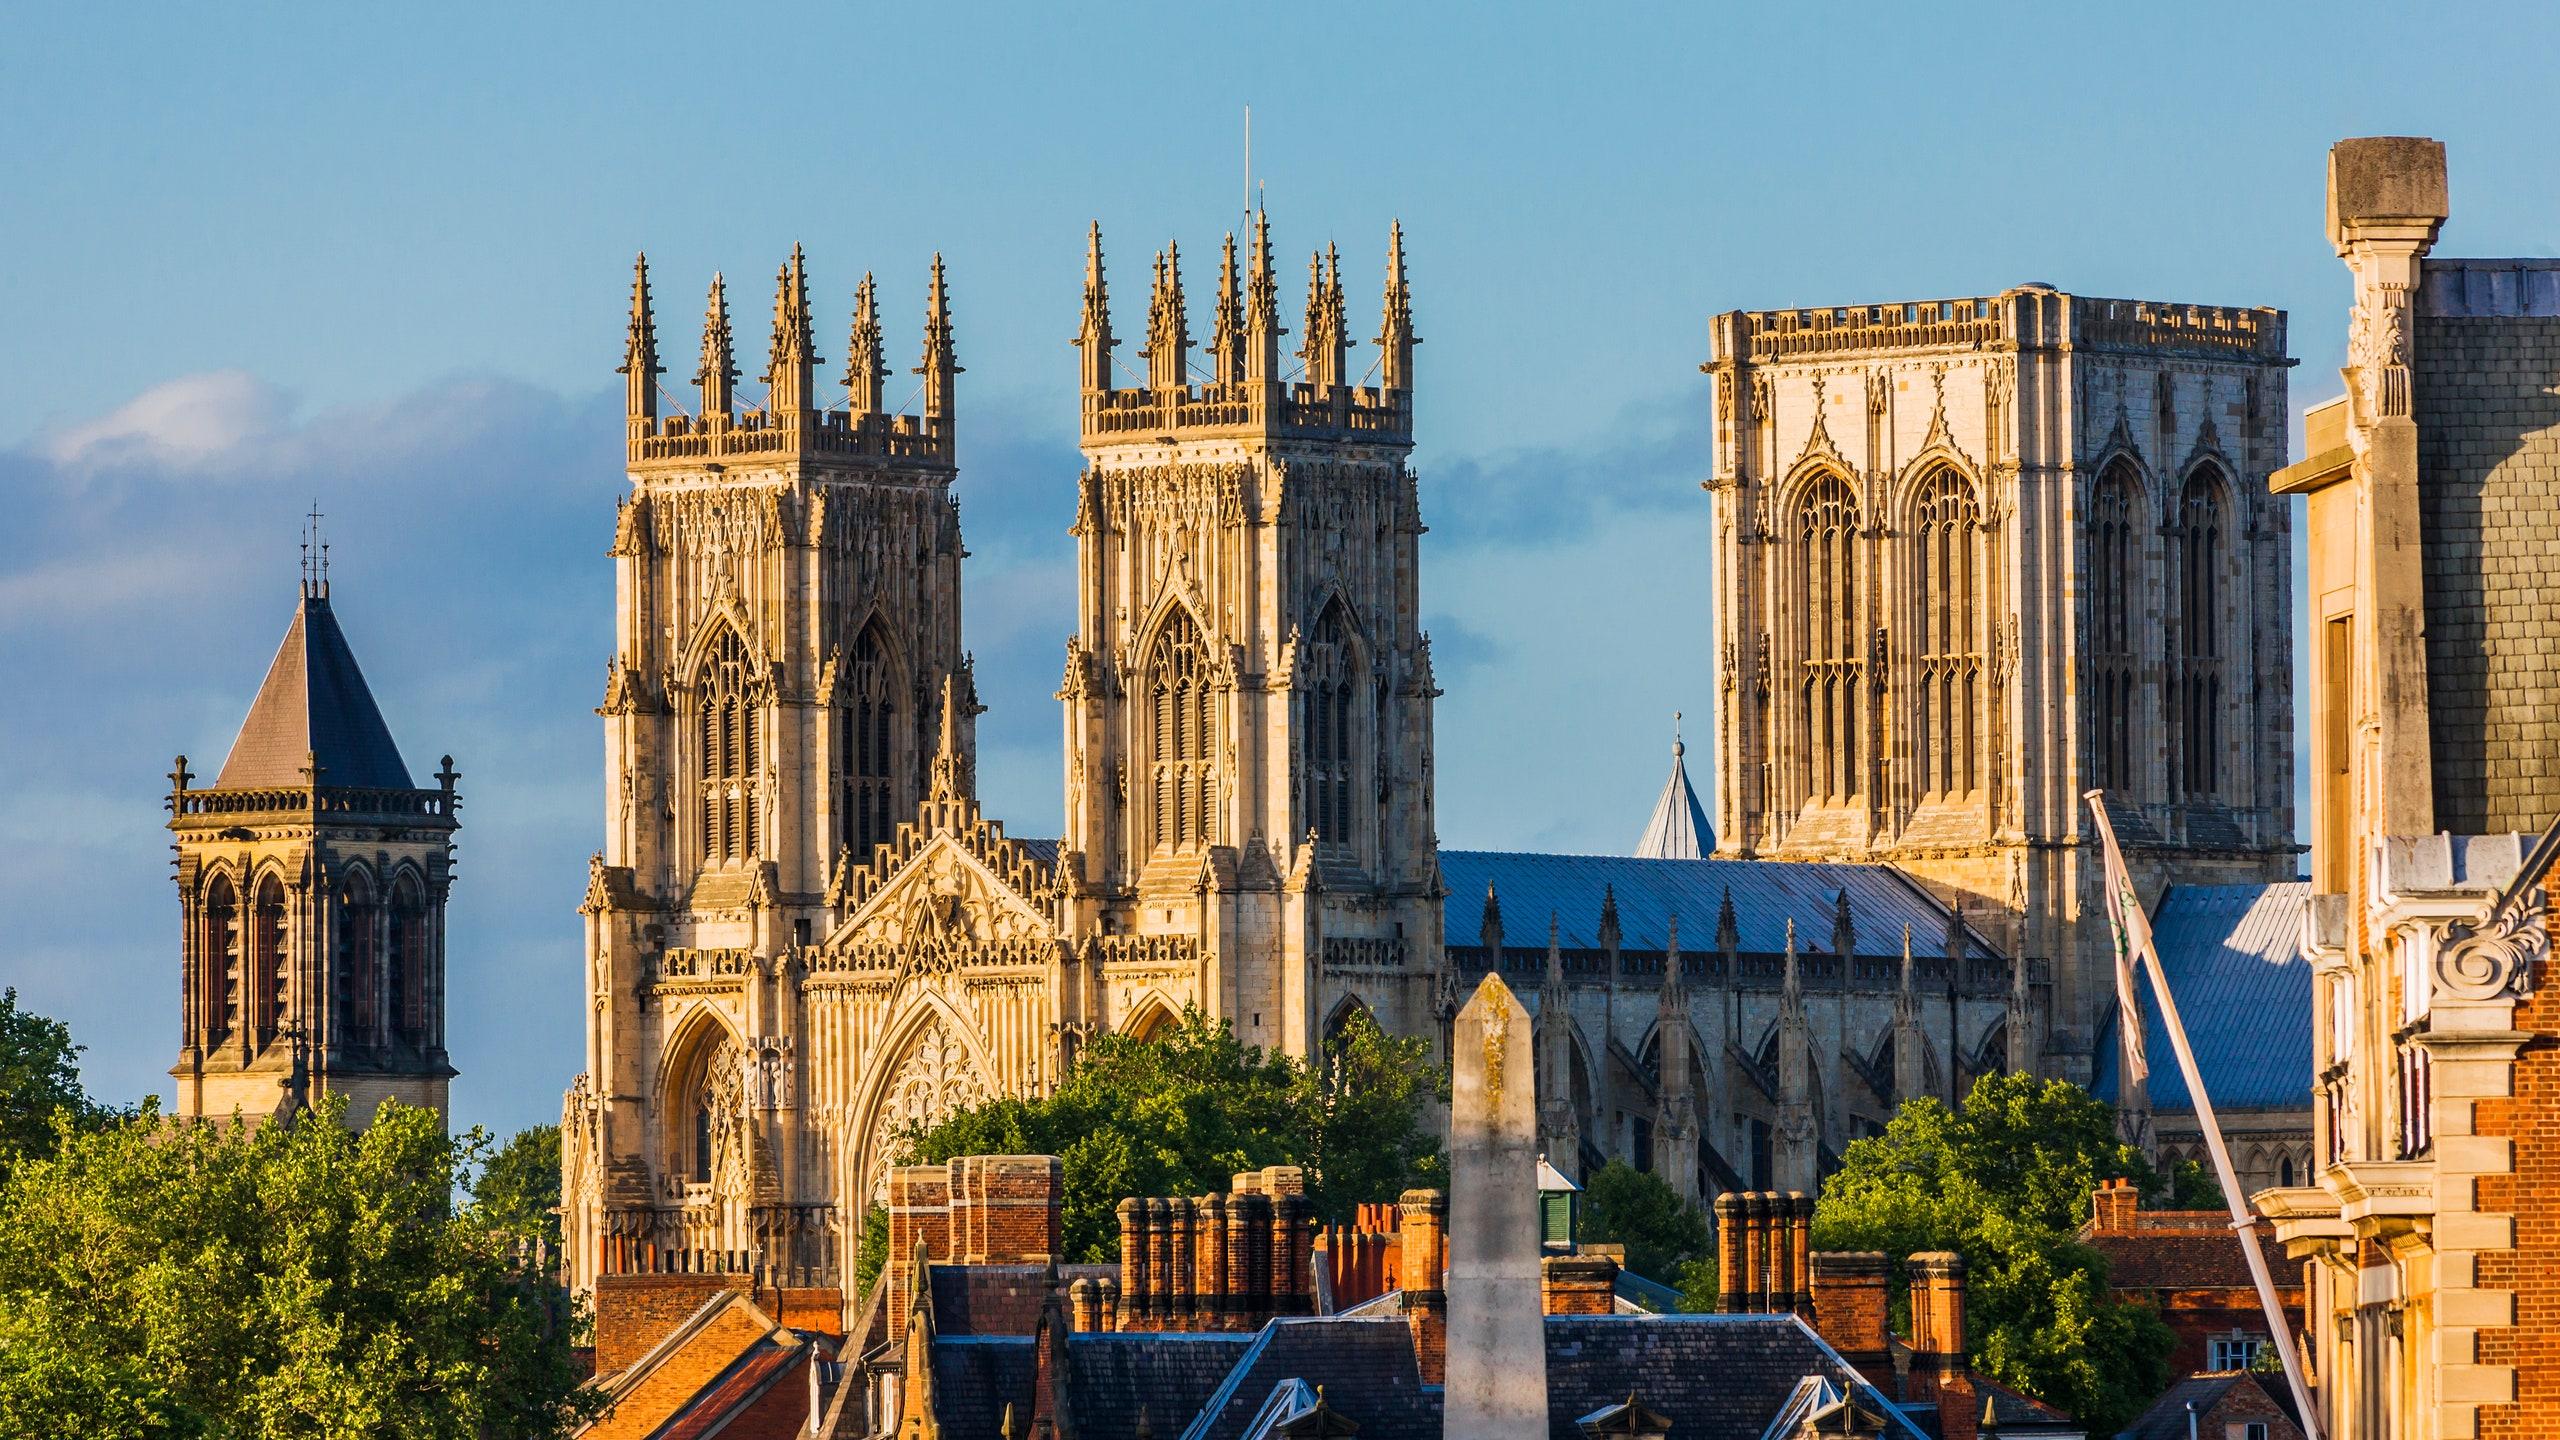 15 things to do in York, from street food to ghost tours